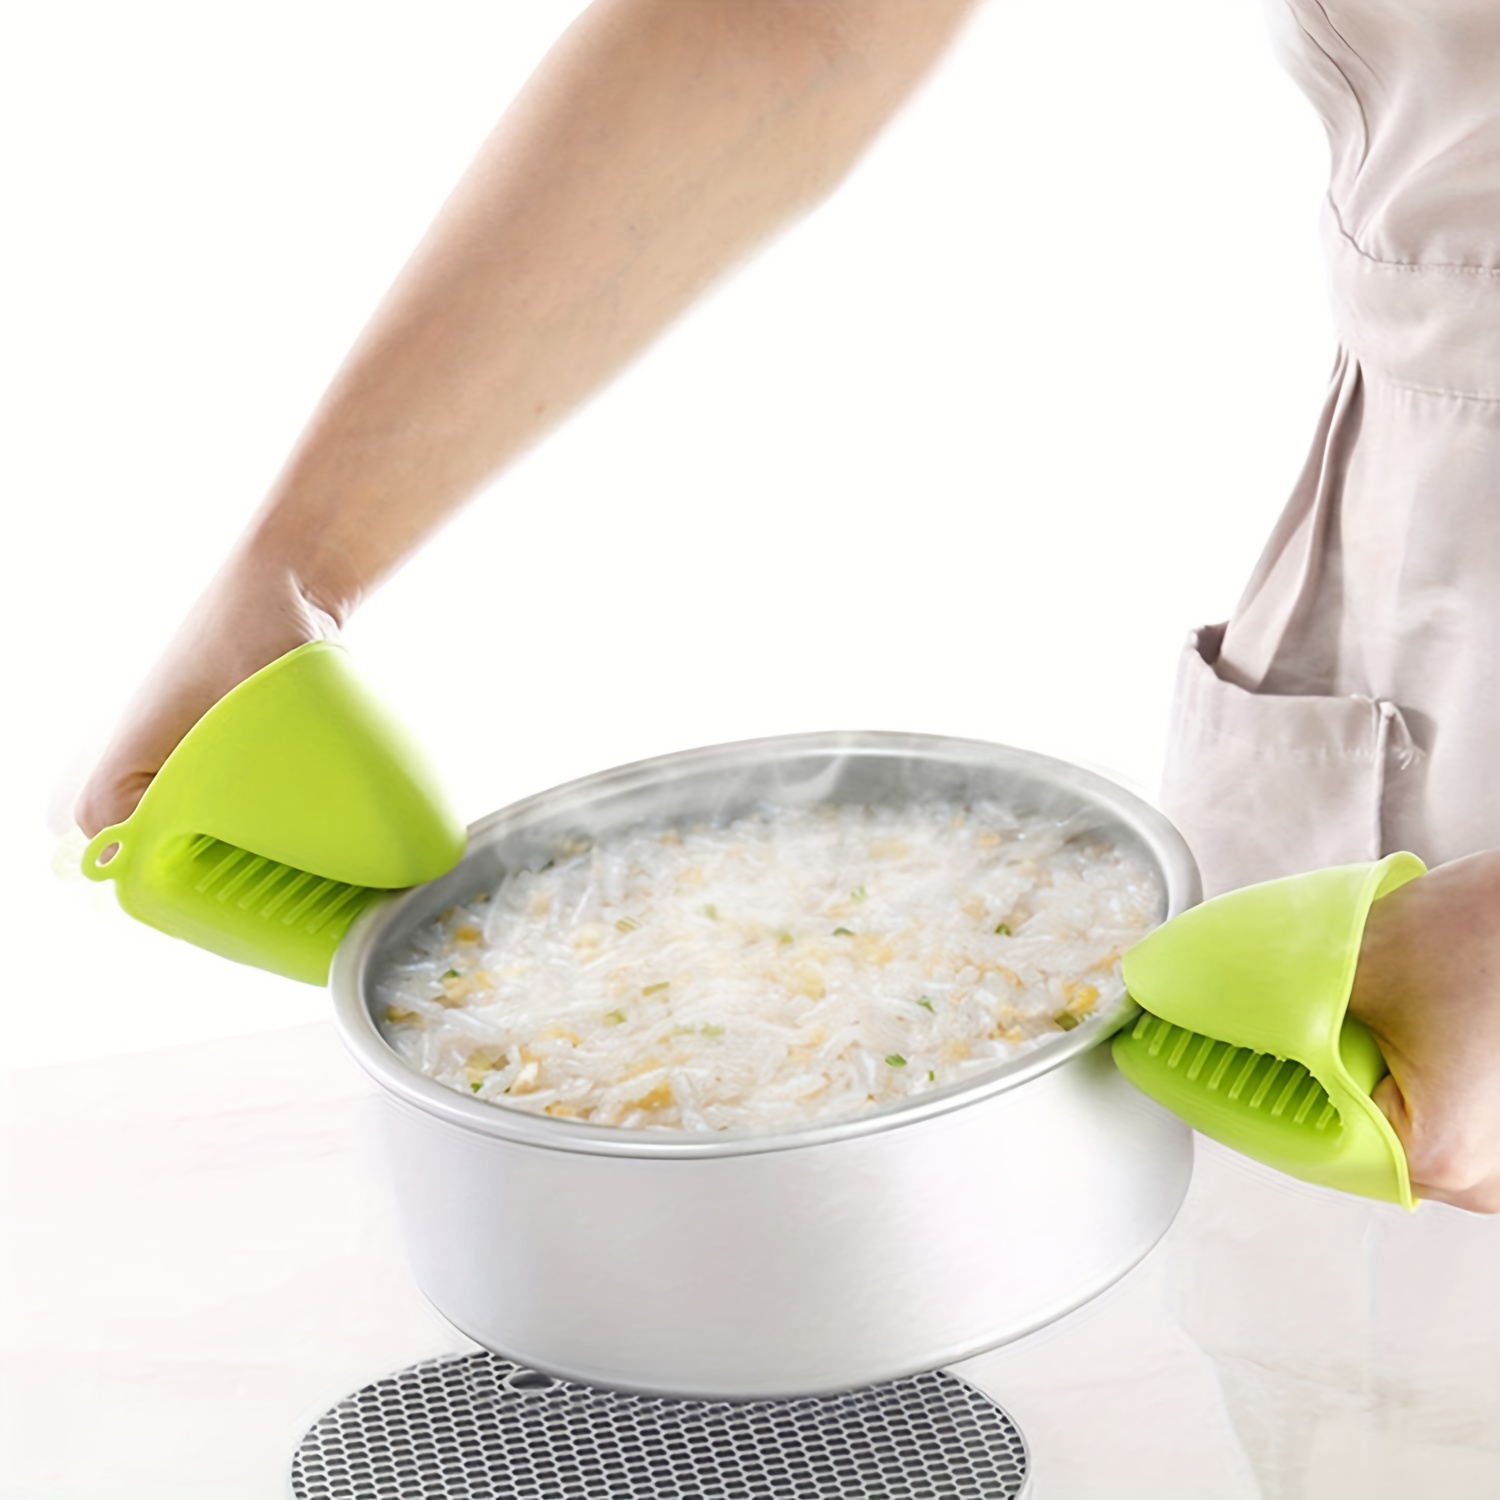 Mini Silicone Oven Mitts Magnetic Ergonomic Gloves Pot Holders Heat  Insulation Cooking For Baking Kitchen Tools